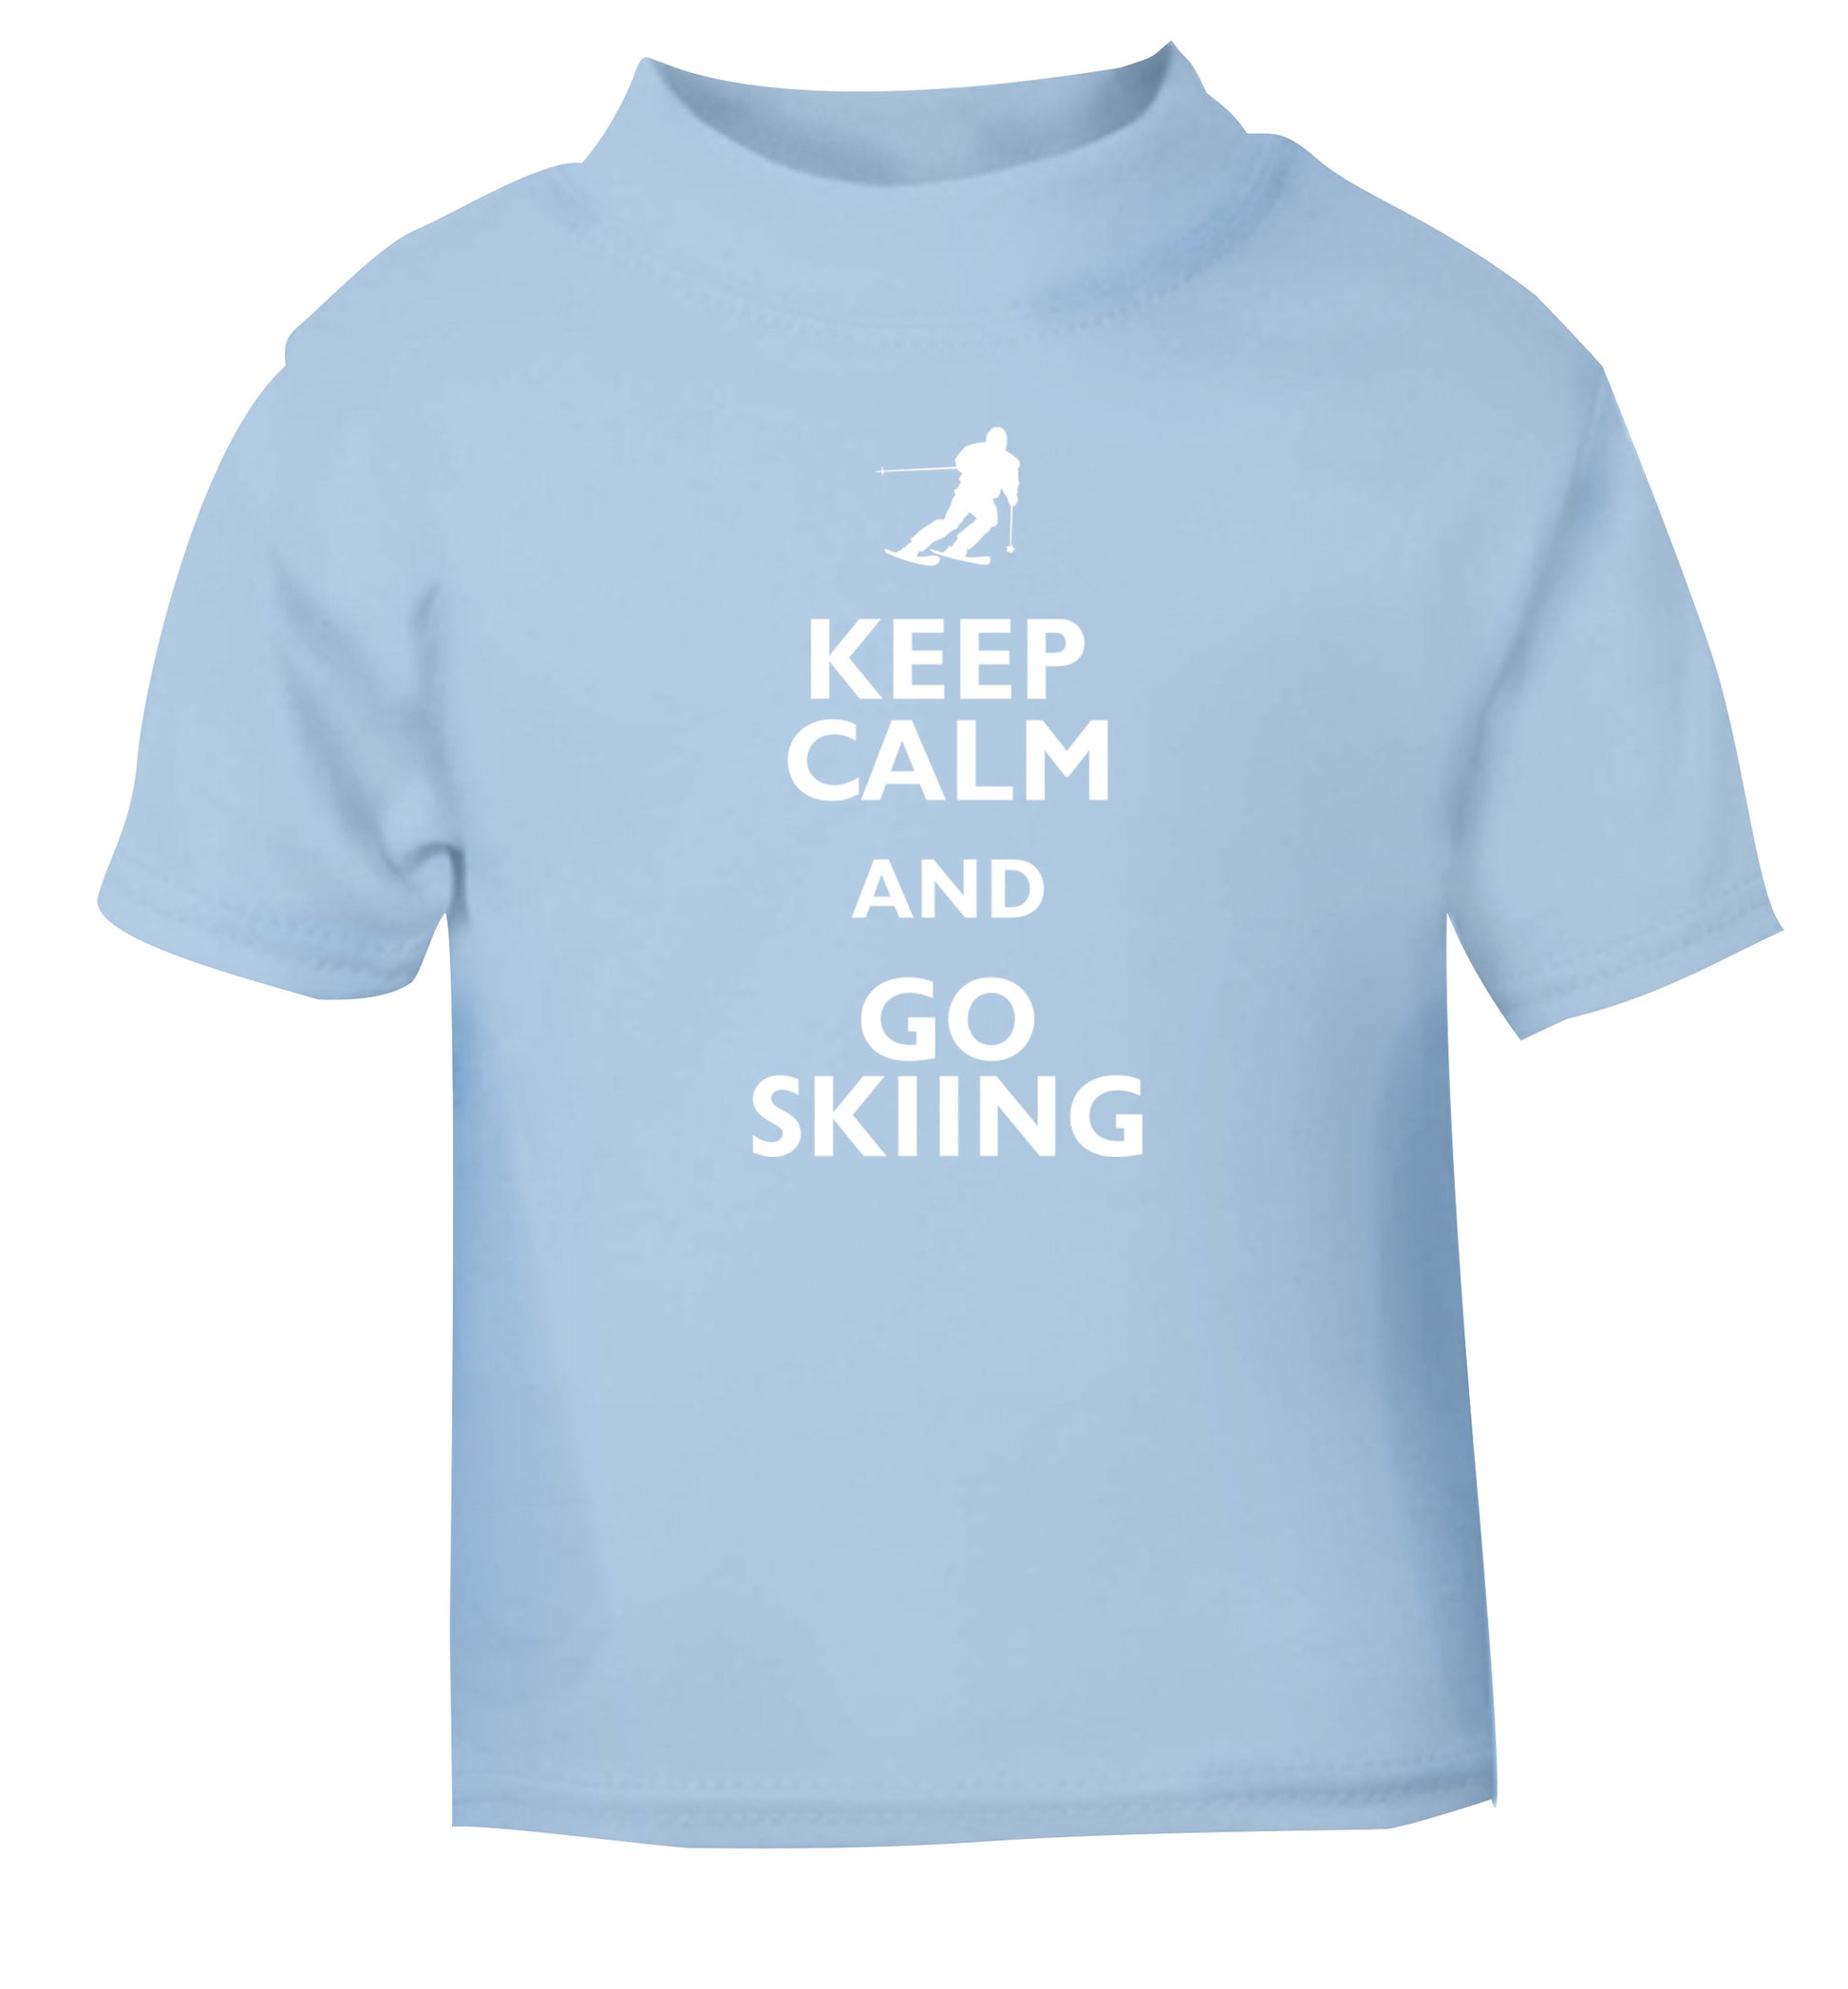 Keep calm and go skiing light blue Baby Toddler Tshirt 2 Years